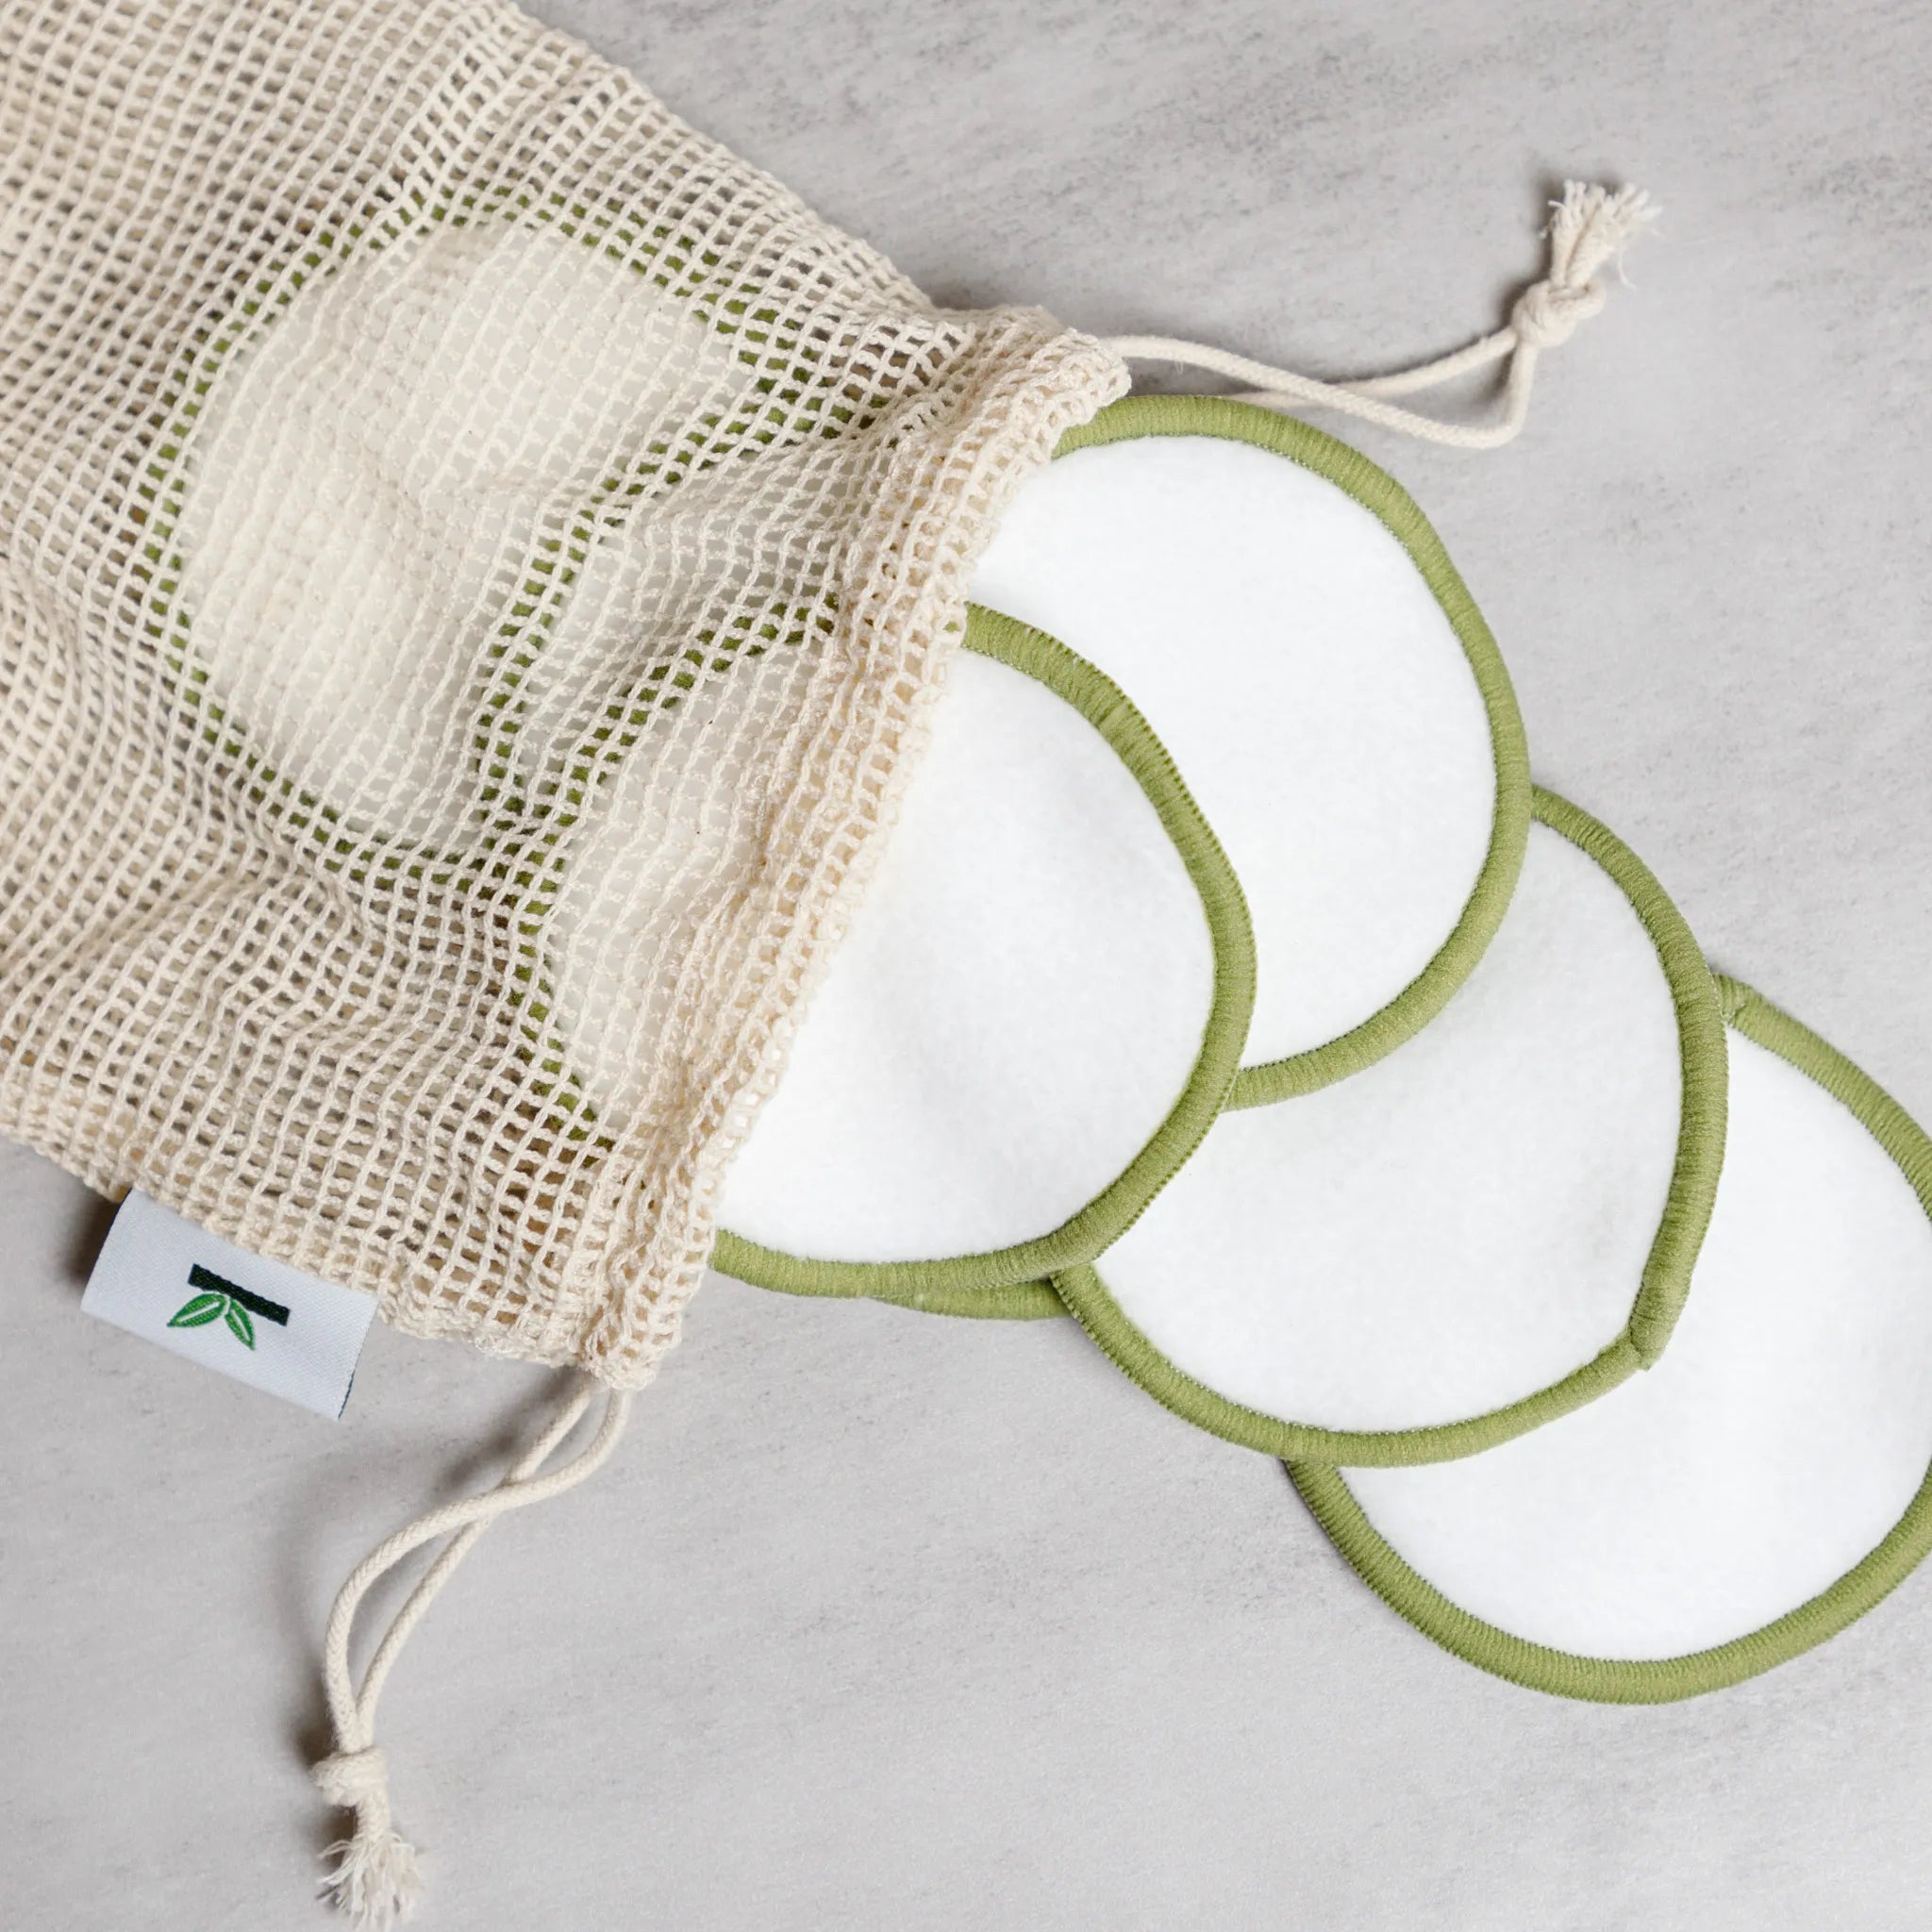 How to Wash Reusable Cotton Rounds